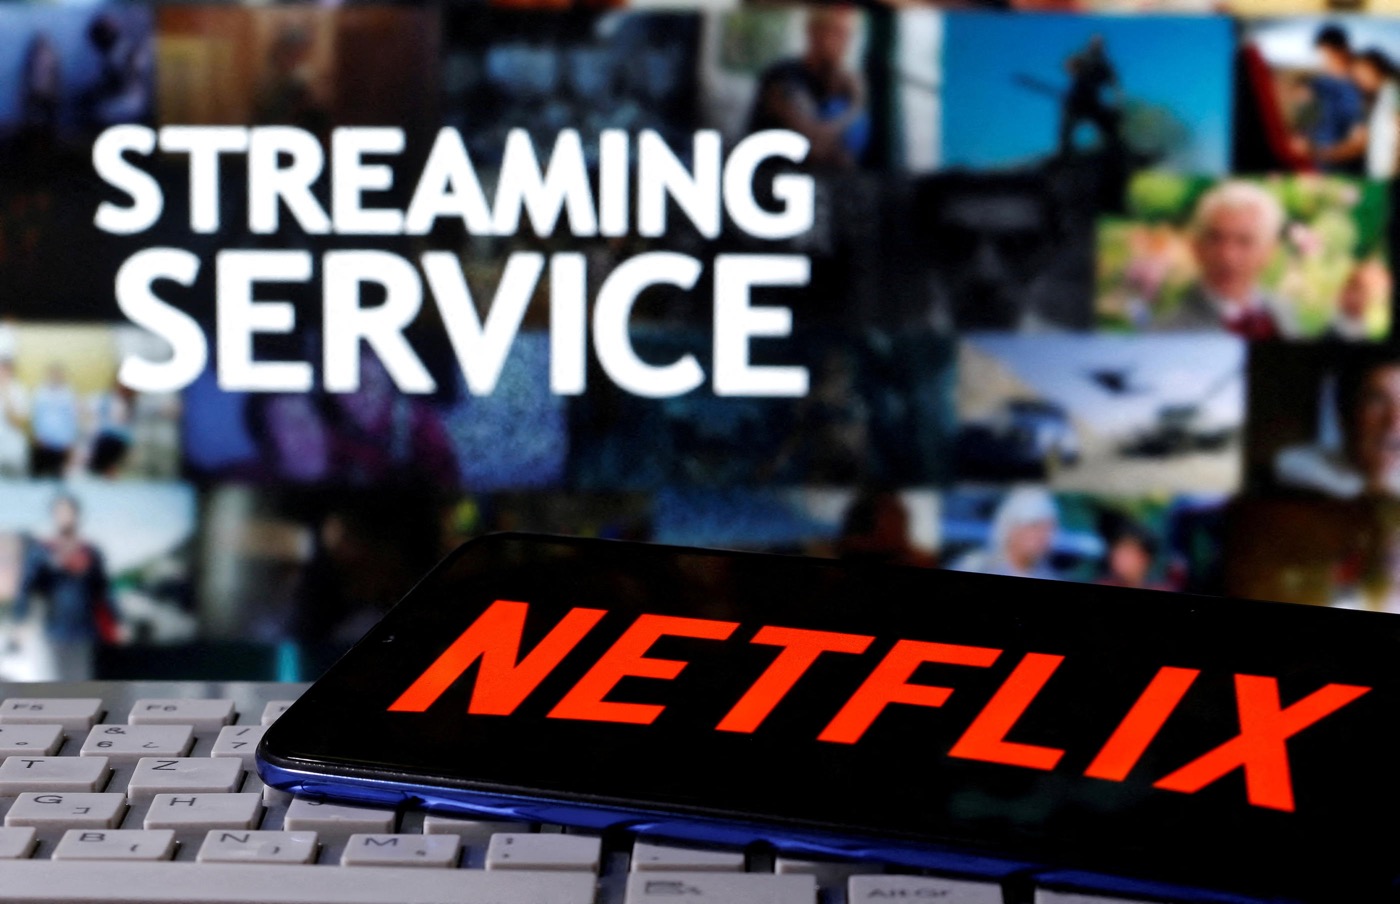 Netflix expands its European production capacity and chooses Spain